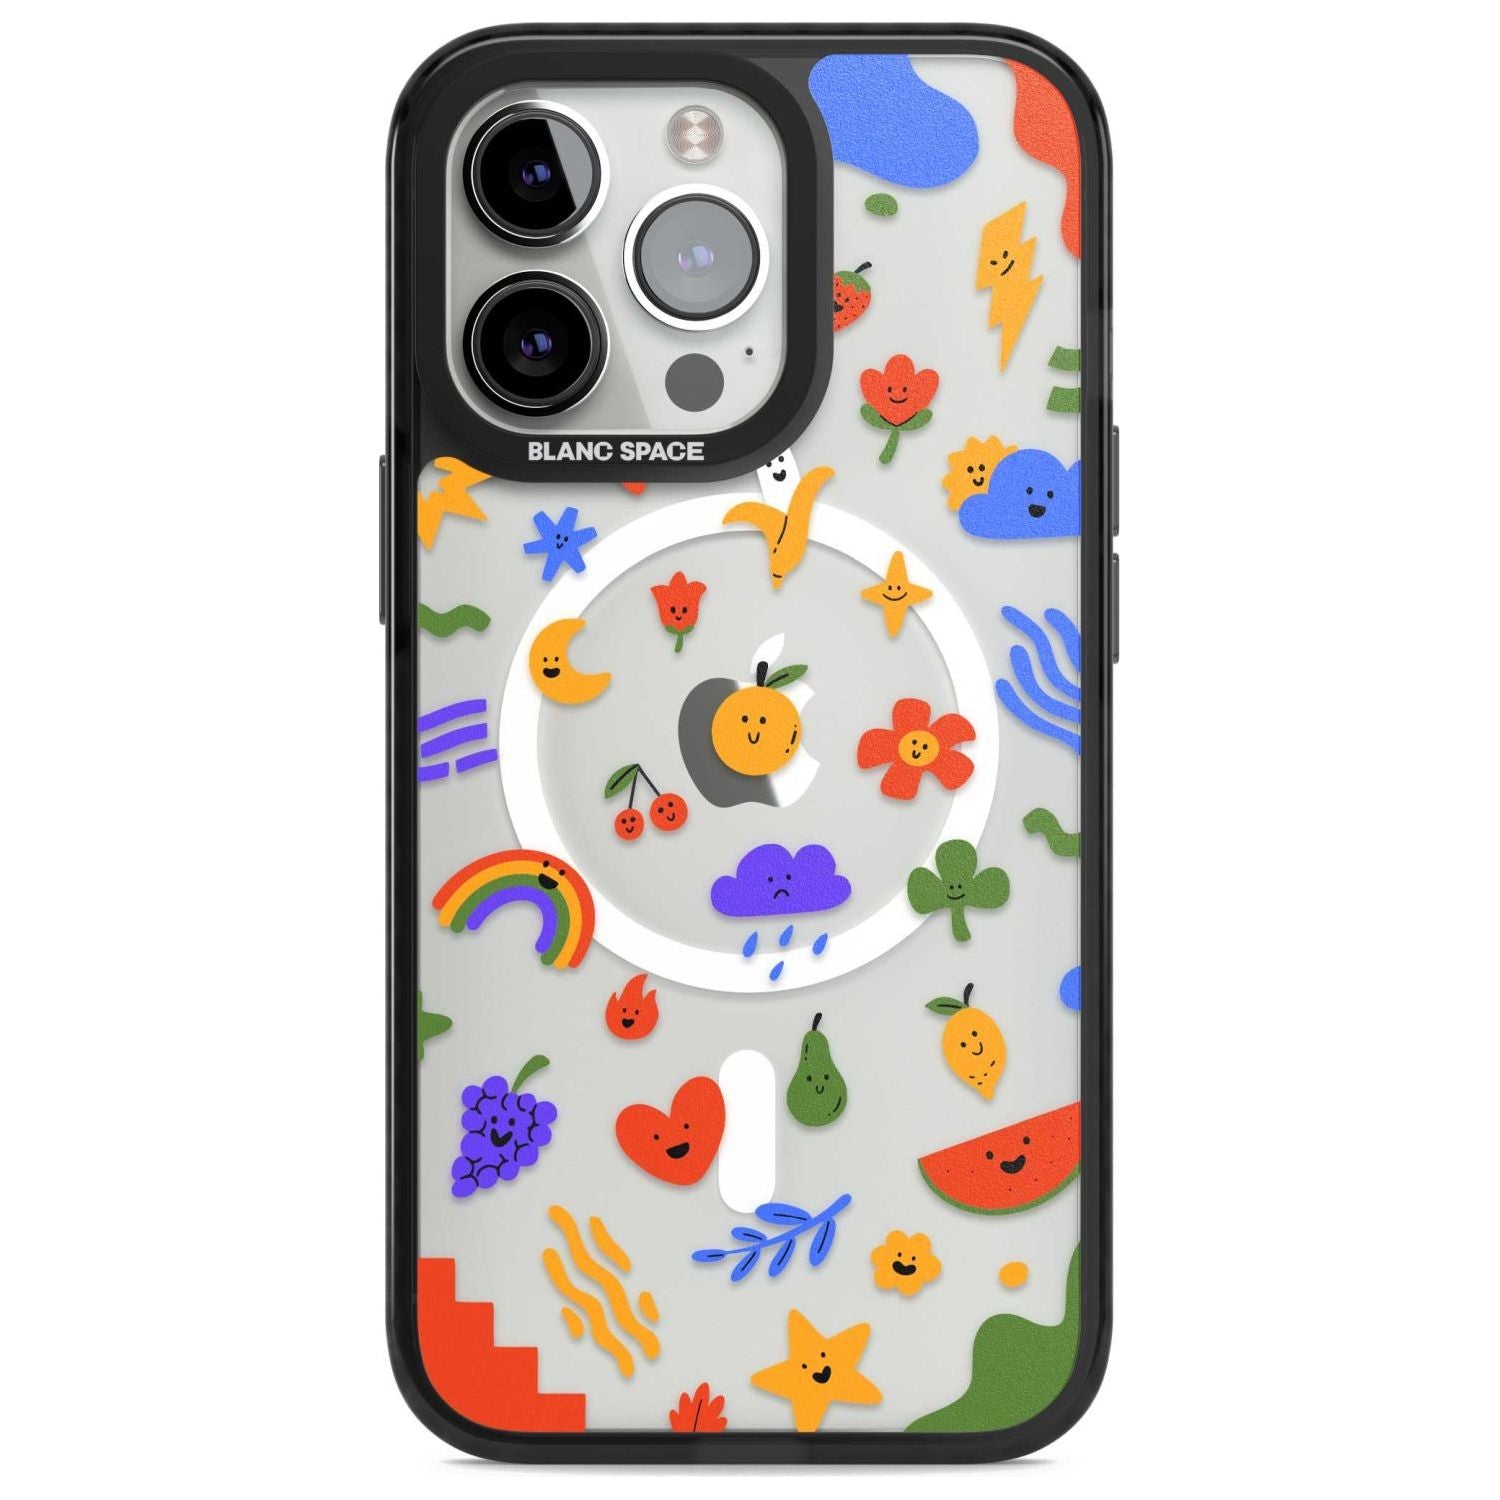 Mixed Cute Icon Pattern - Clear Phone Case iPhone 15 Pro Max / Magsafe Black Impact Case,iPhone 15 Pro / Magsafe Black Impact Case,iPhone 14 Pro Max / Magsafe Black Impact Case,iPhone 14 Pro / Magsafe Black Impact Case,iPhone 13 Pro / Magsafe Black Impact Case Blanc Space